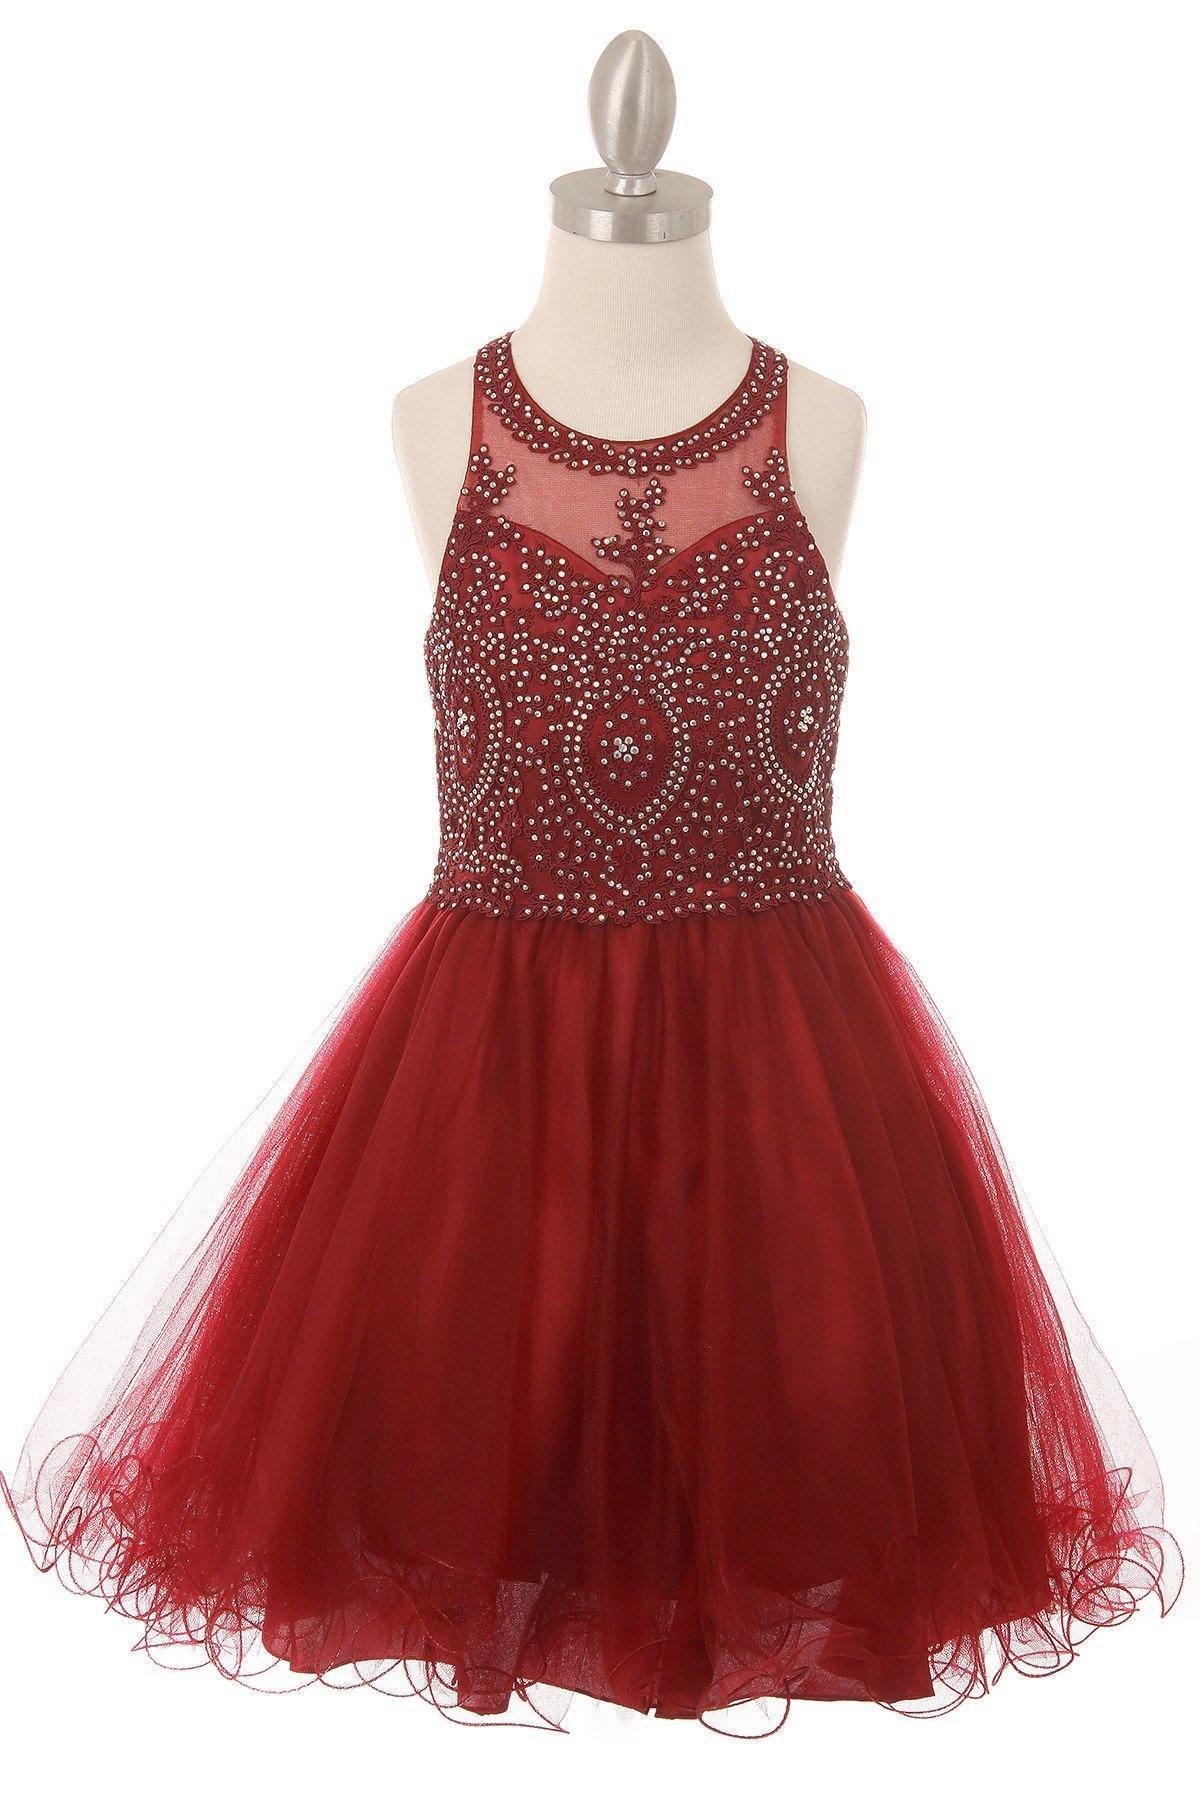 Beaded Sequin Short Flower Girl Dress - The Dress Outlet Cinderella Couture